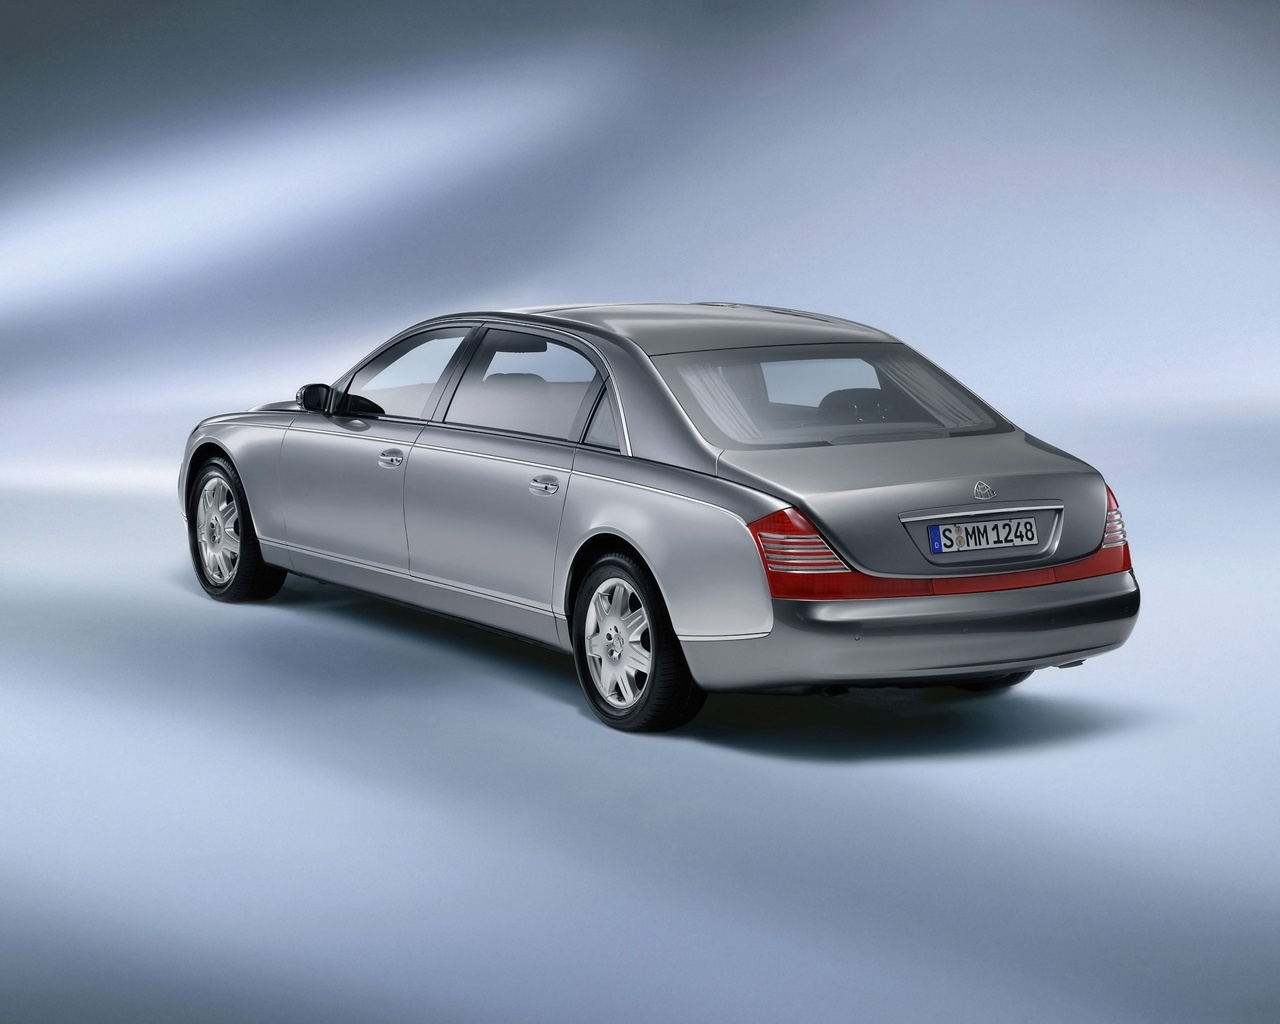 Maybach 62 Rear for 1280 x 1024 resolution